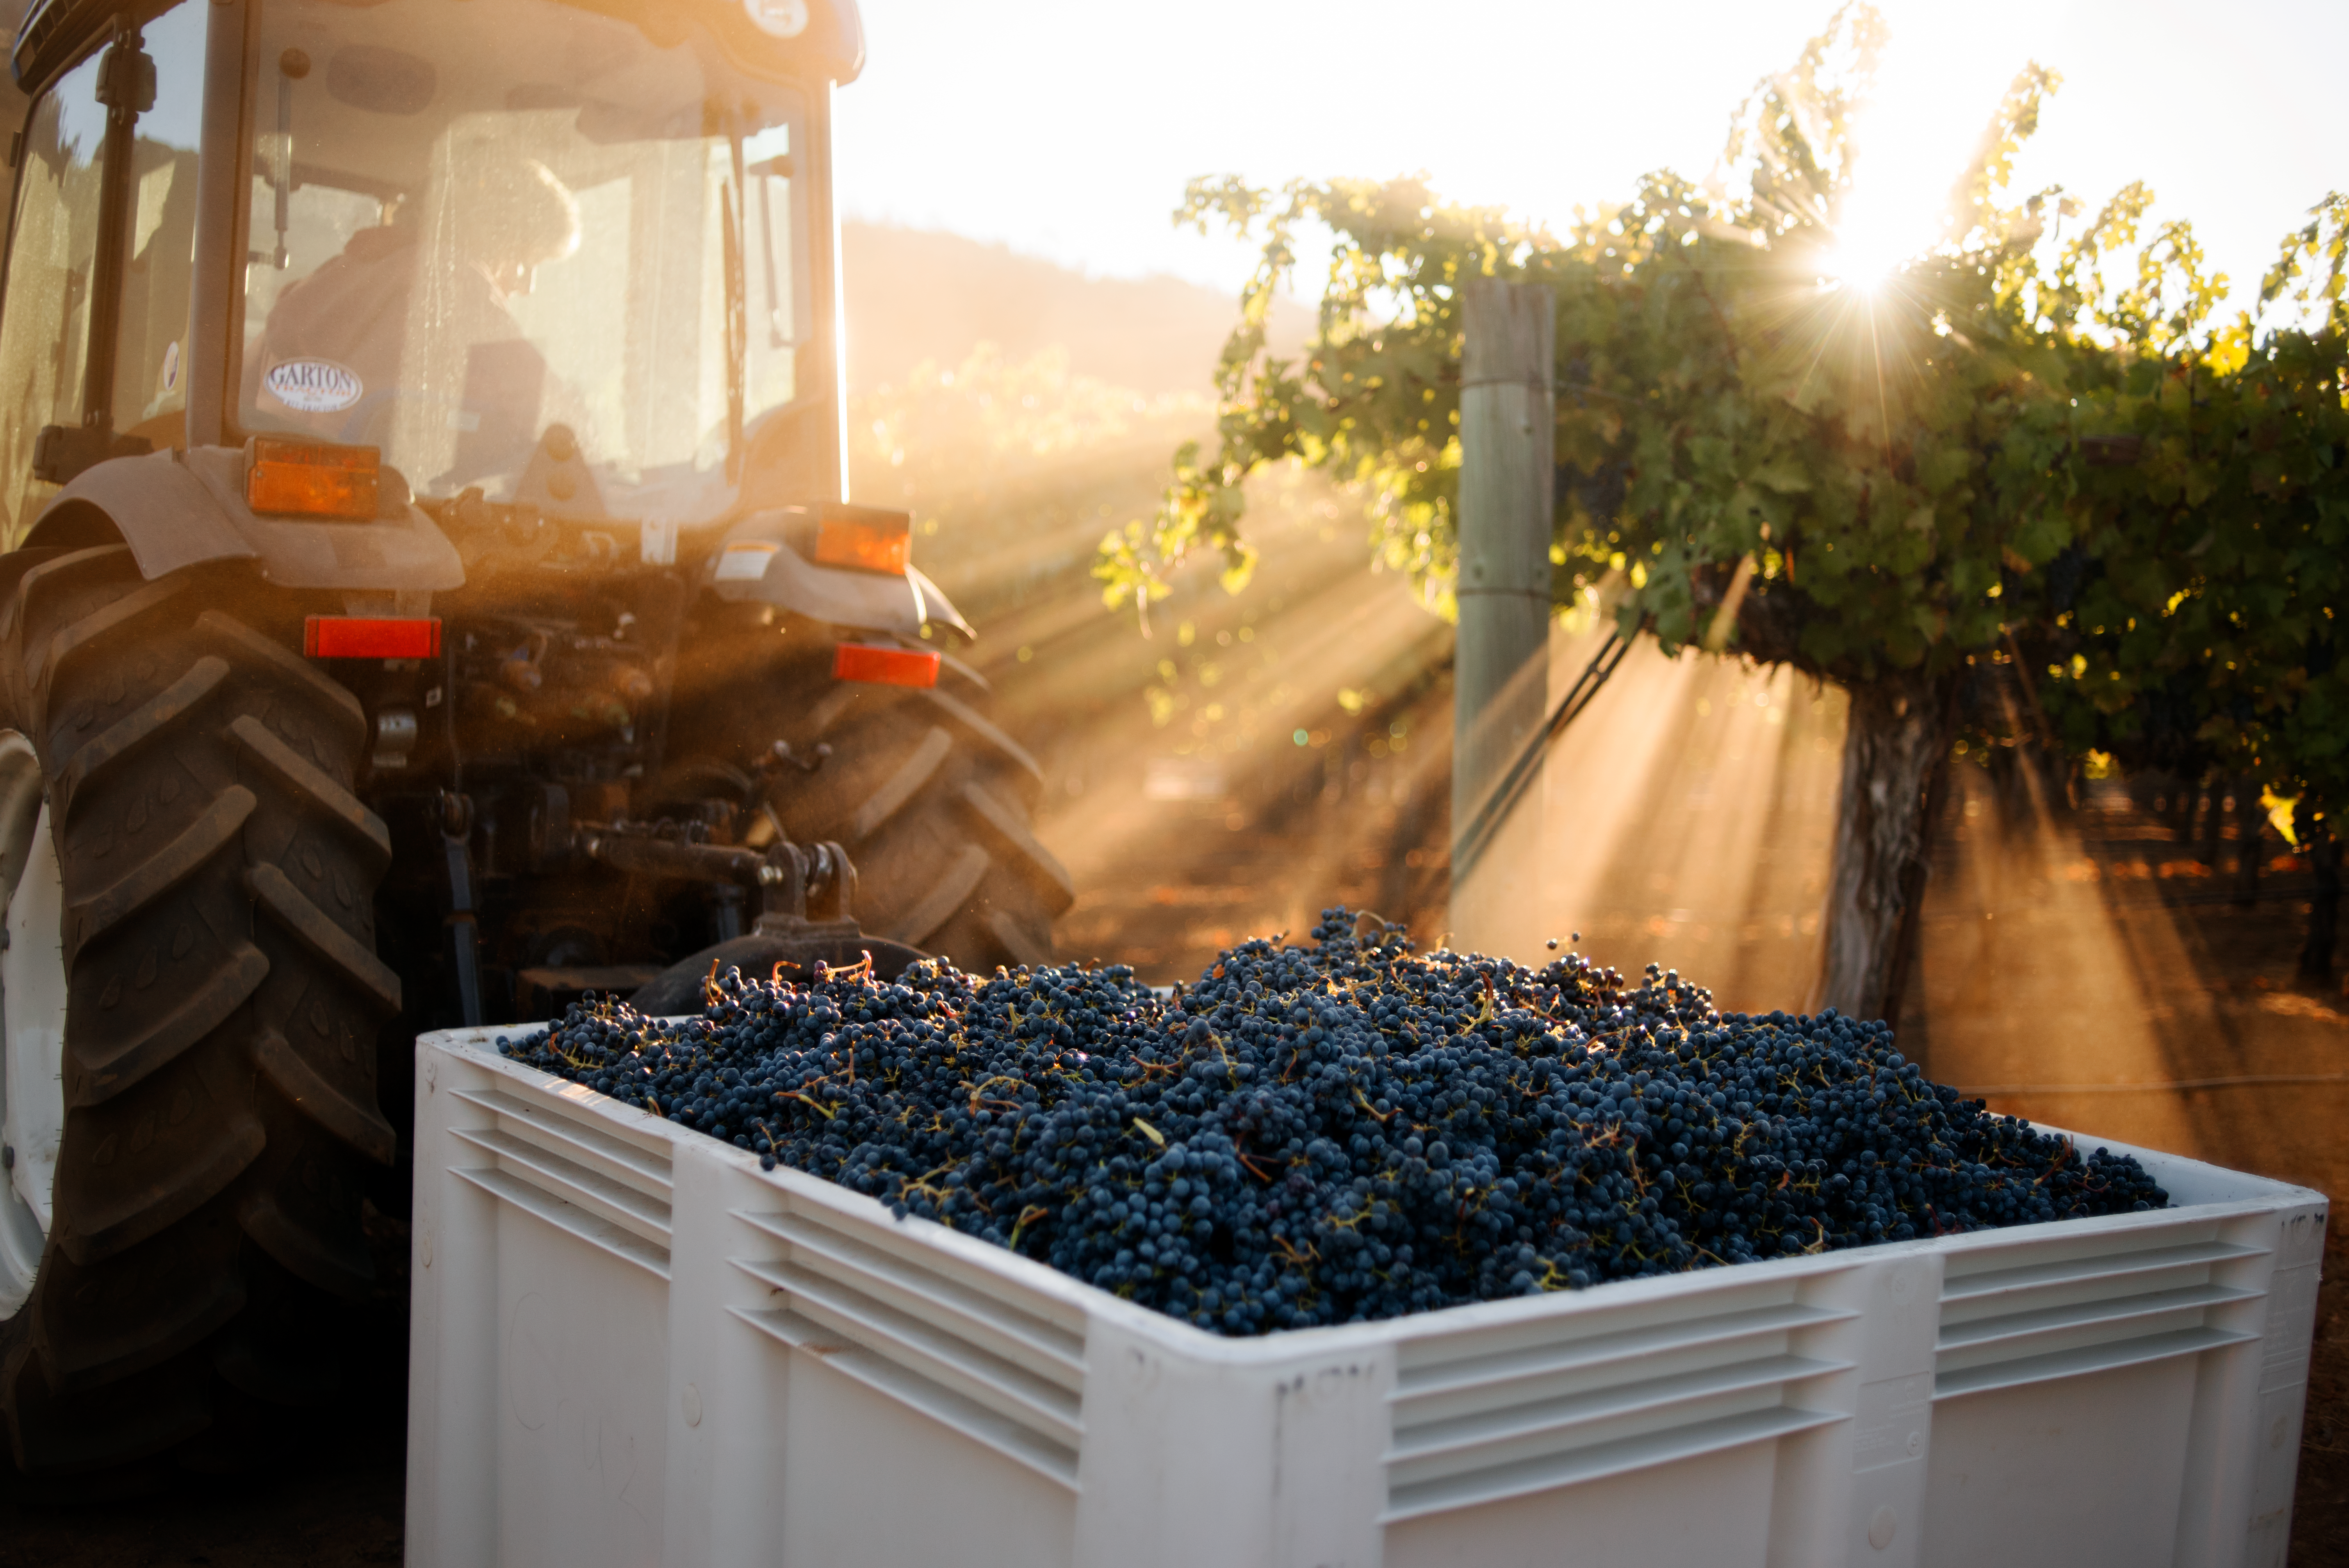 Tractorload of harvested grapes